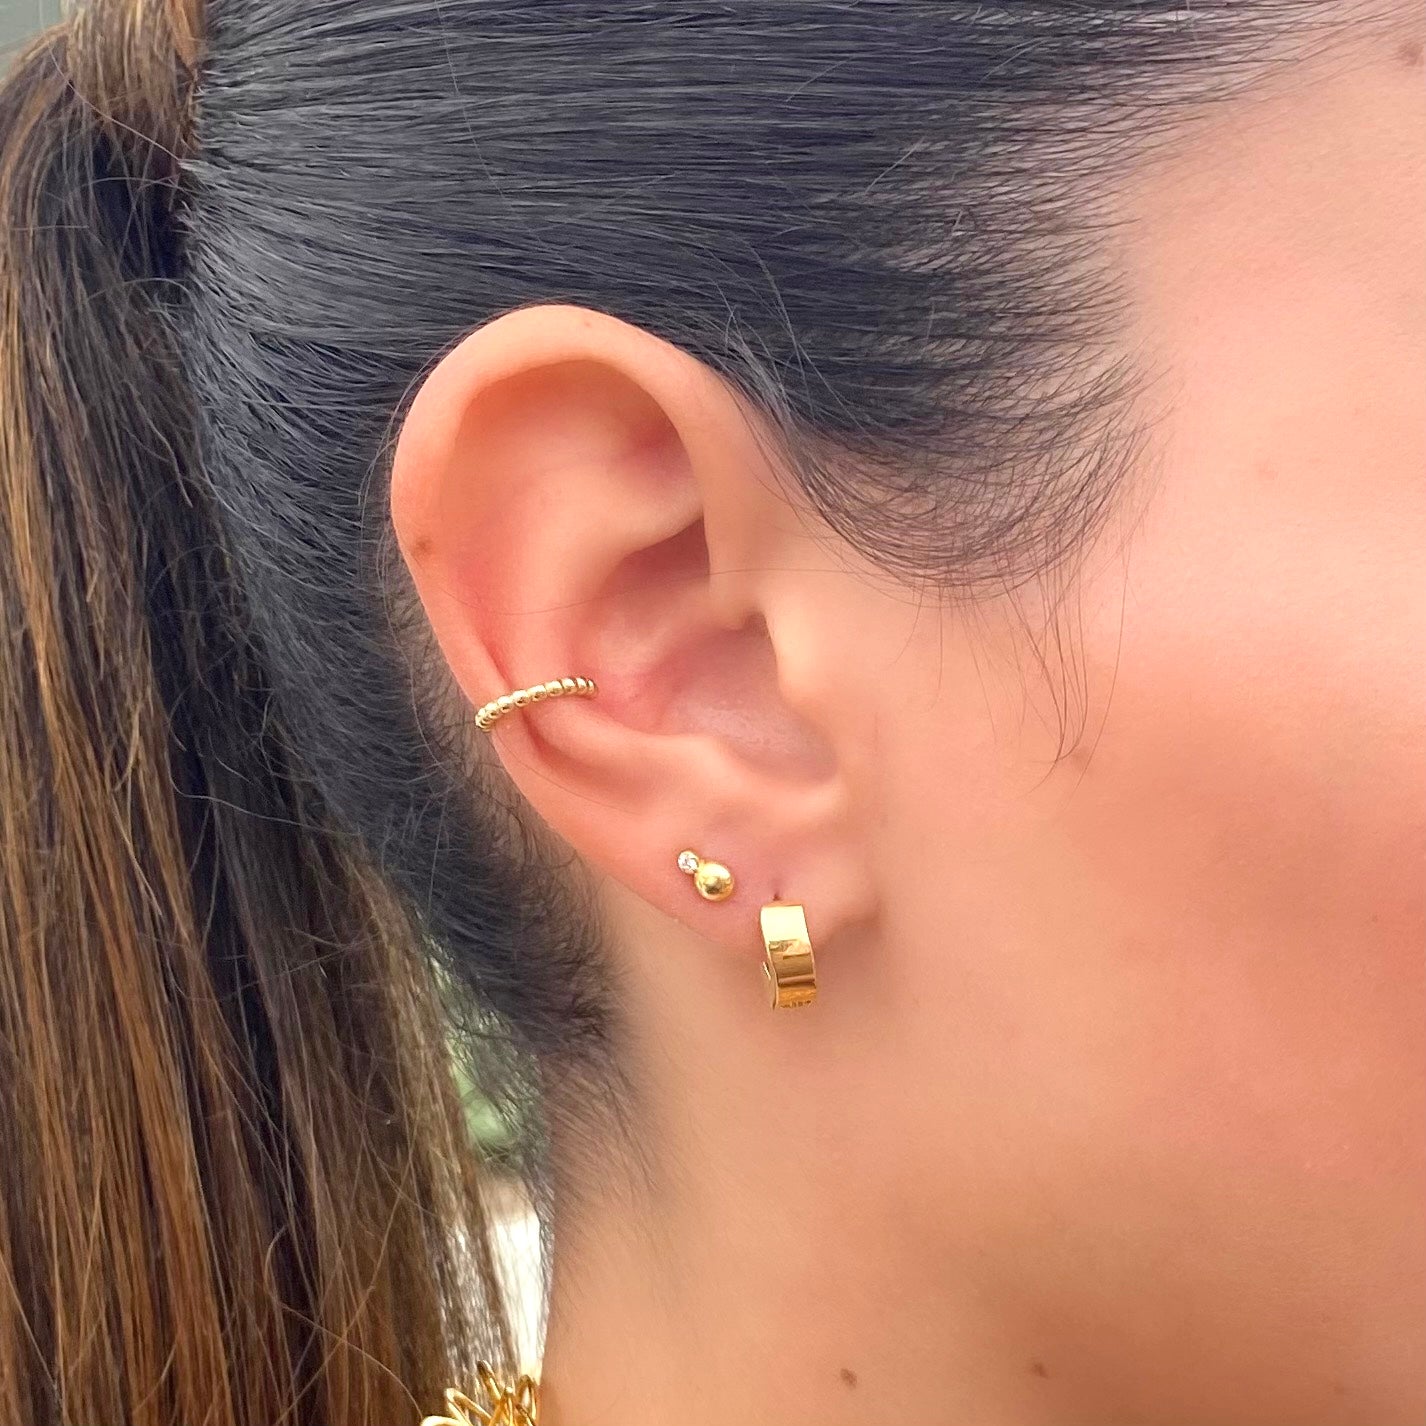 Every day gold earring